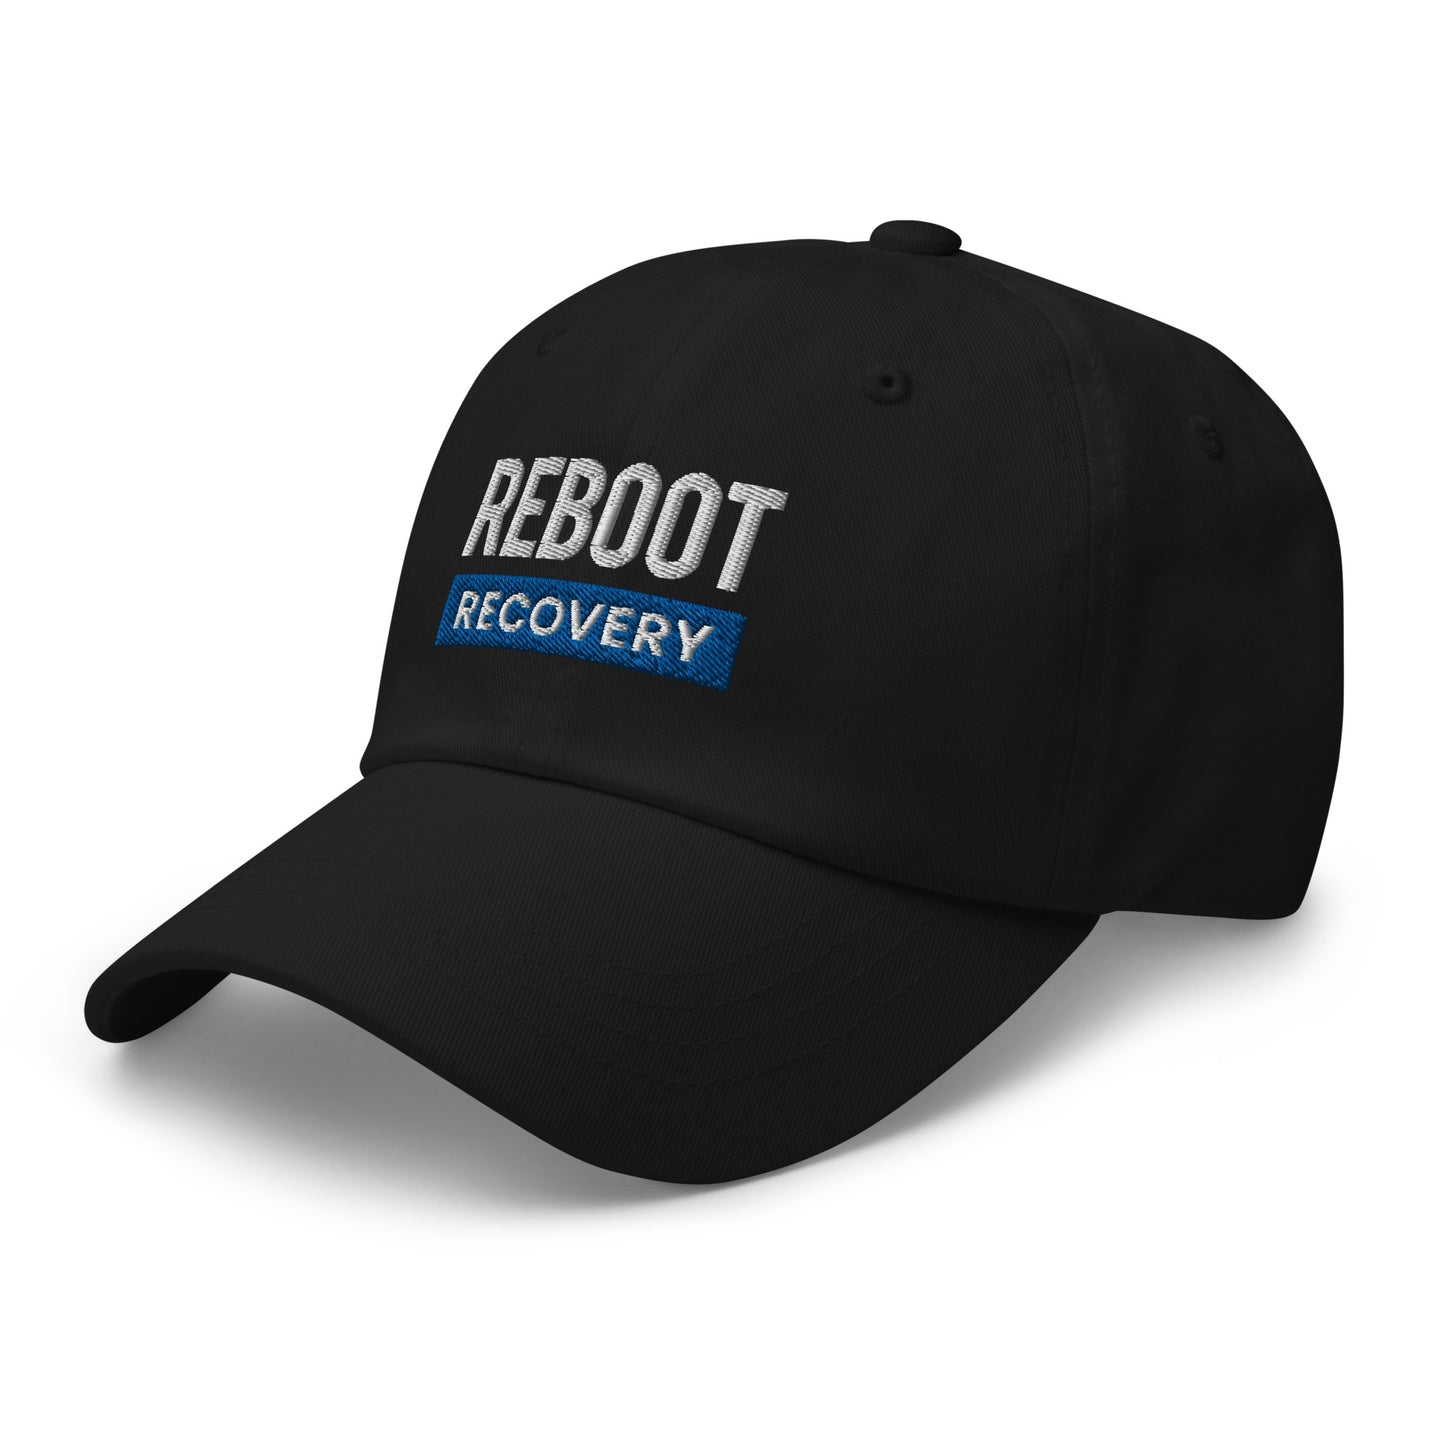 REBOOT Recovery Black Dad hat